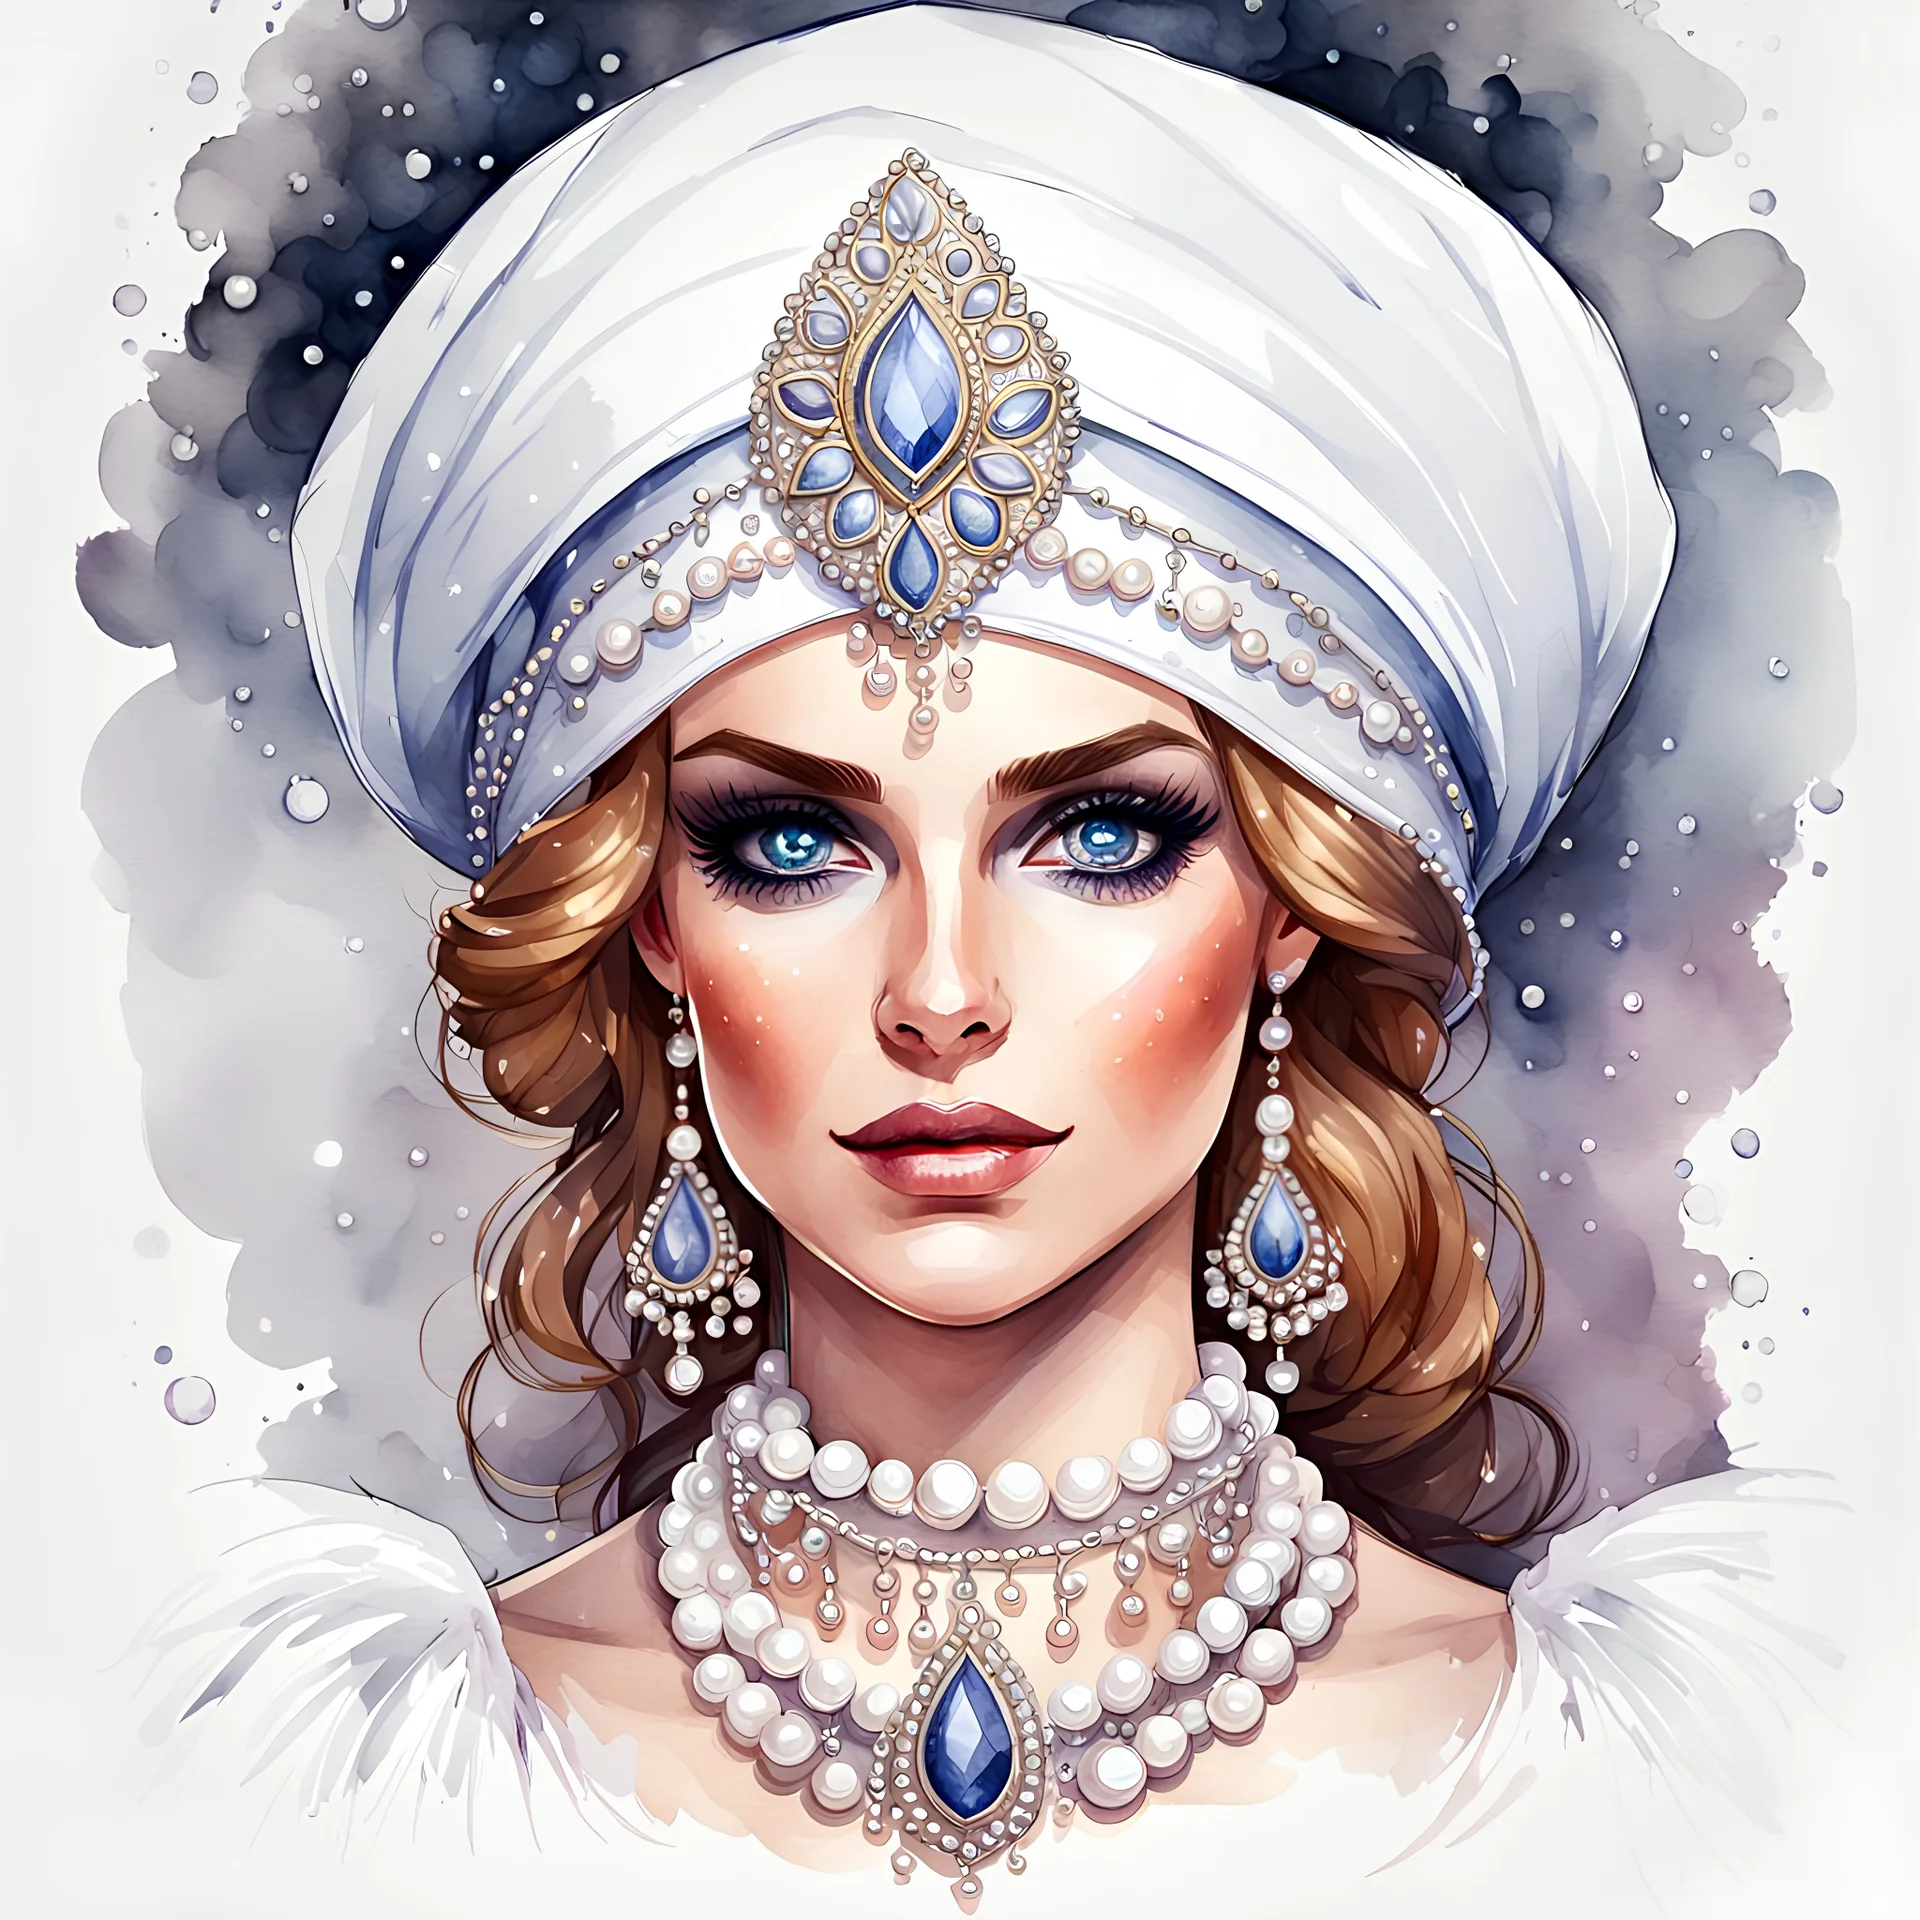 watercolor drawing of a Russian kokoshnik with pearls on a white background, Trending on Artstation, {creative commons}, fanart, AIart, {Woolitize}, by Charlie Bowater, Illustration, Color Grading, Filmic, Nikon D750, Brenizer Method, Perspective, Depth of Field, Field of View, F/2.8, Lens Flare, Tonal Colors, 8K, Full-HD, ProPhoto RGB, Perfectionism, Rim Lighting, Natural Lighting, Soft Lighting, Acc